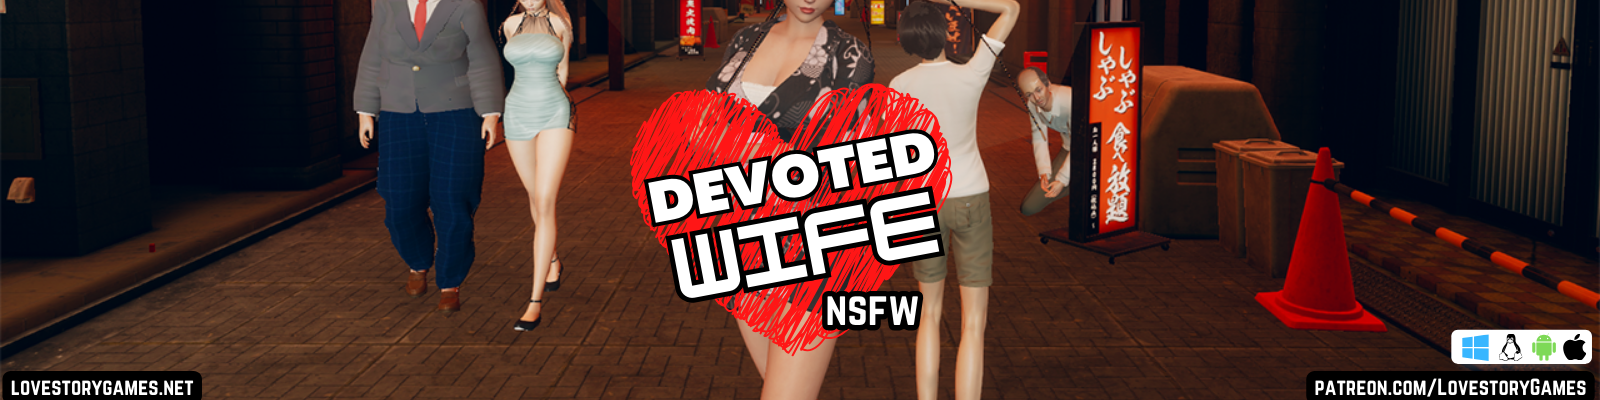 Devoted Wife